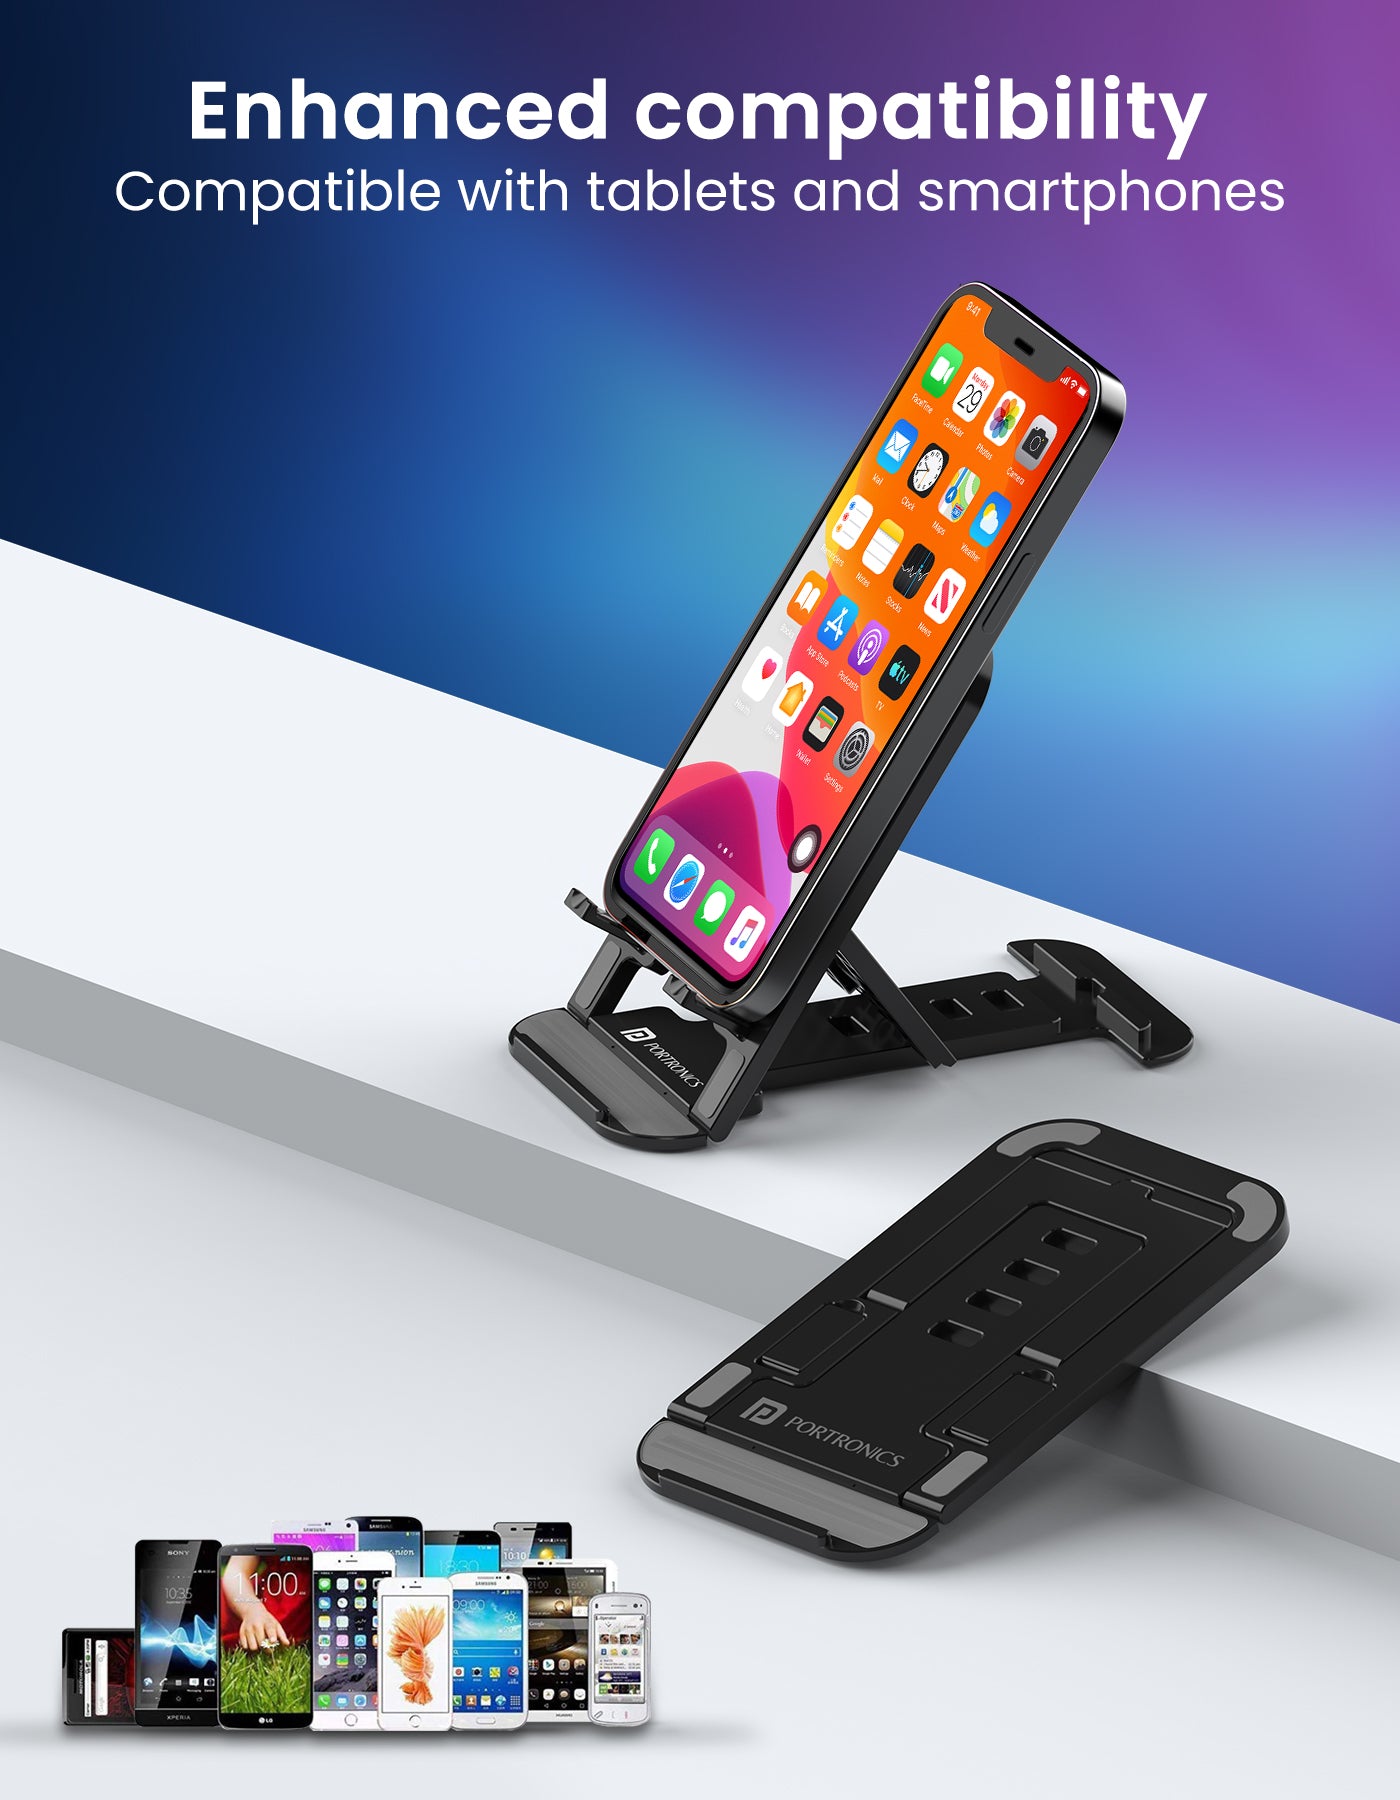 ABS meatalic body on Portronics Modesk 100 Phone | Mobile Stand/Holder